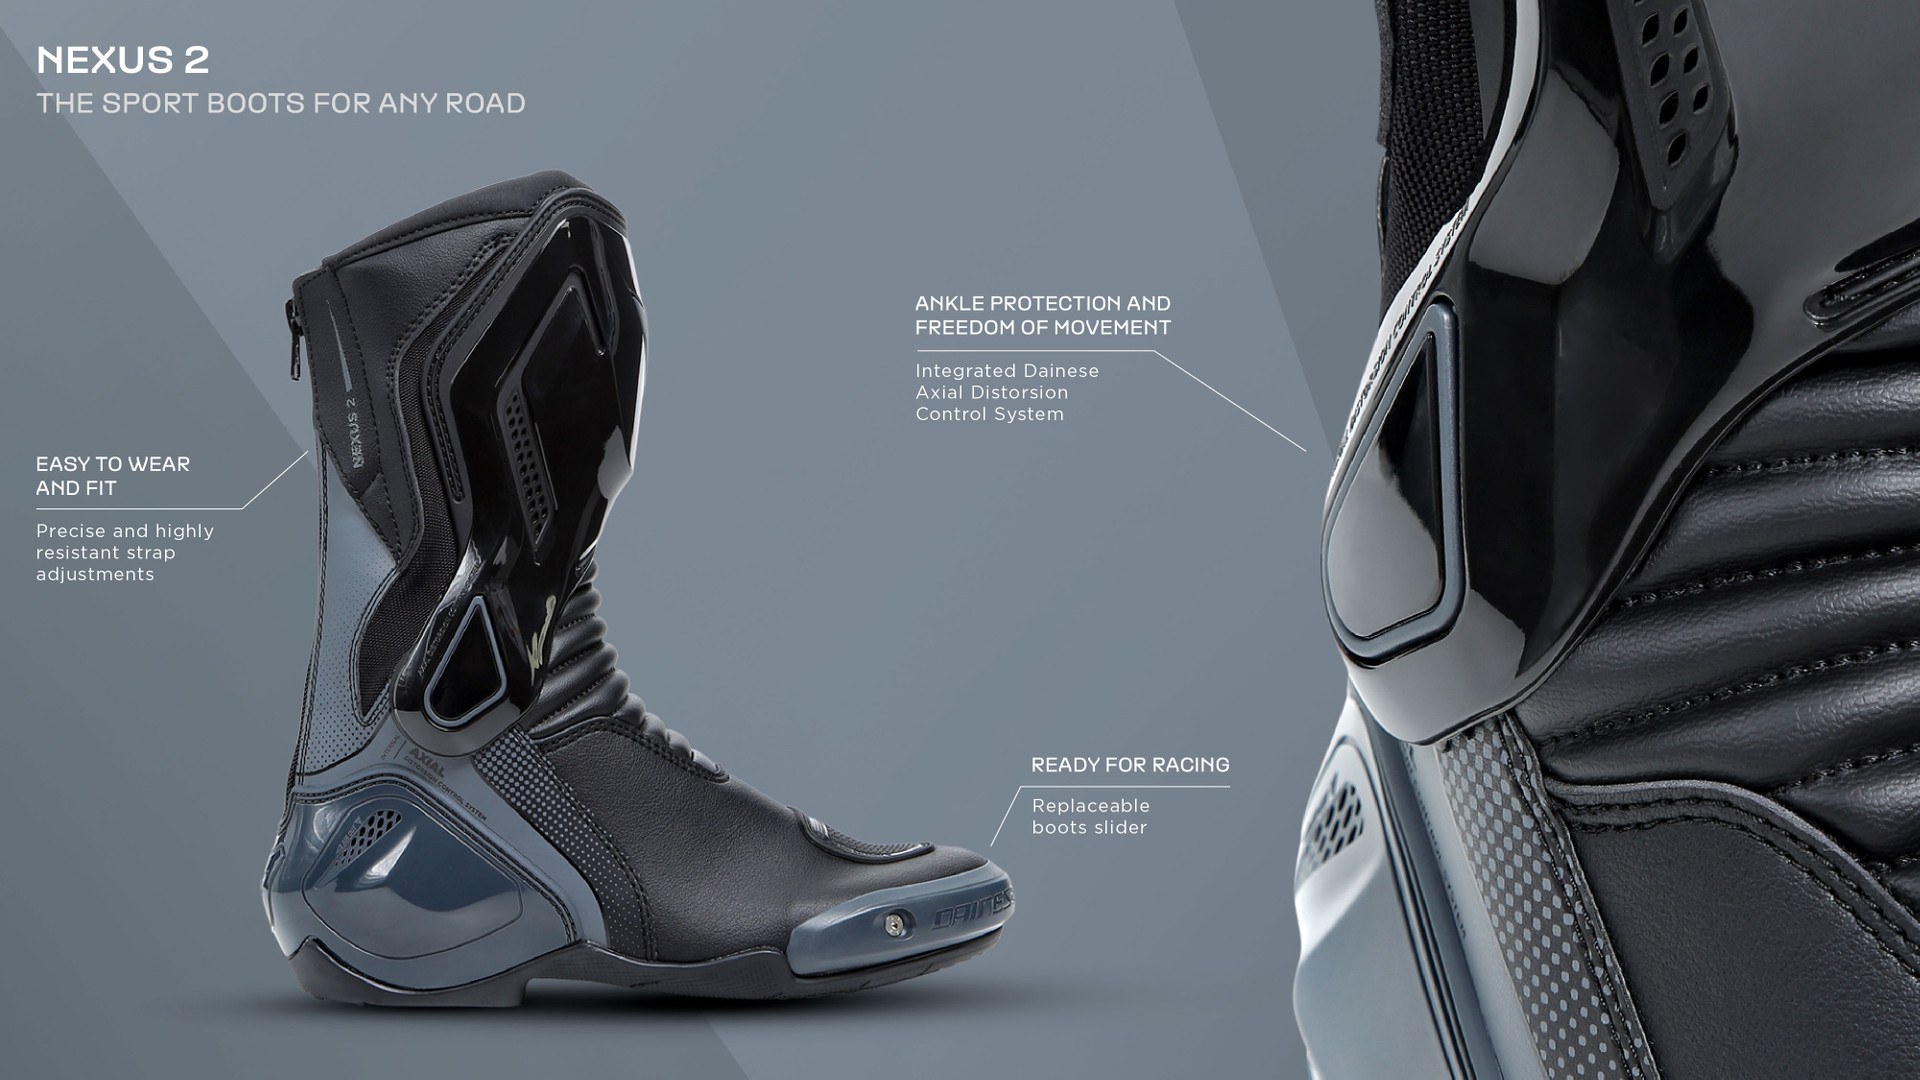  Dainese Men's Nexus 2 Air Motorcycle Riding Boots -  Infographic 